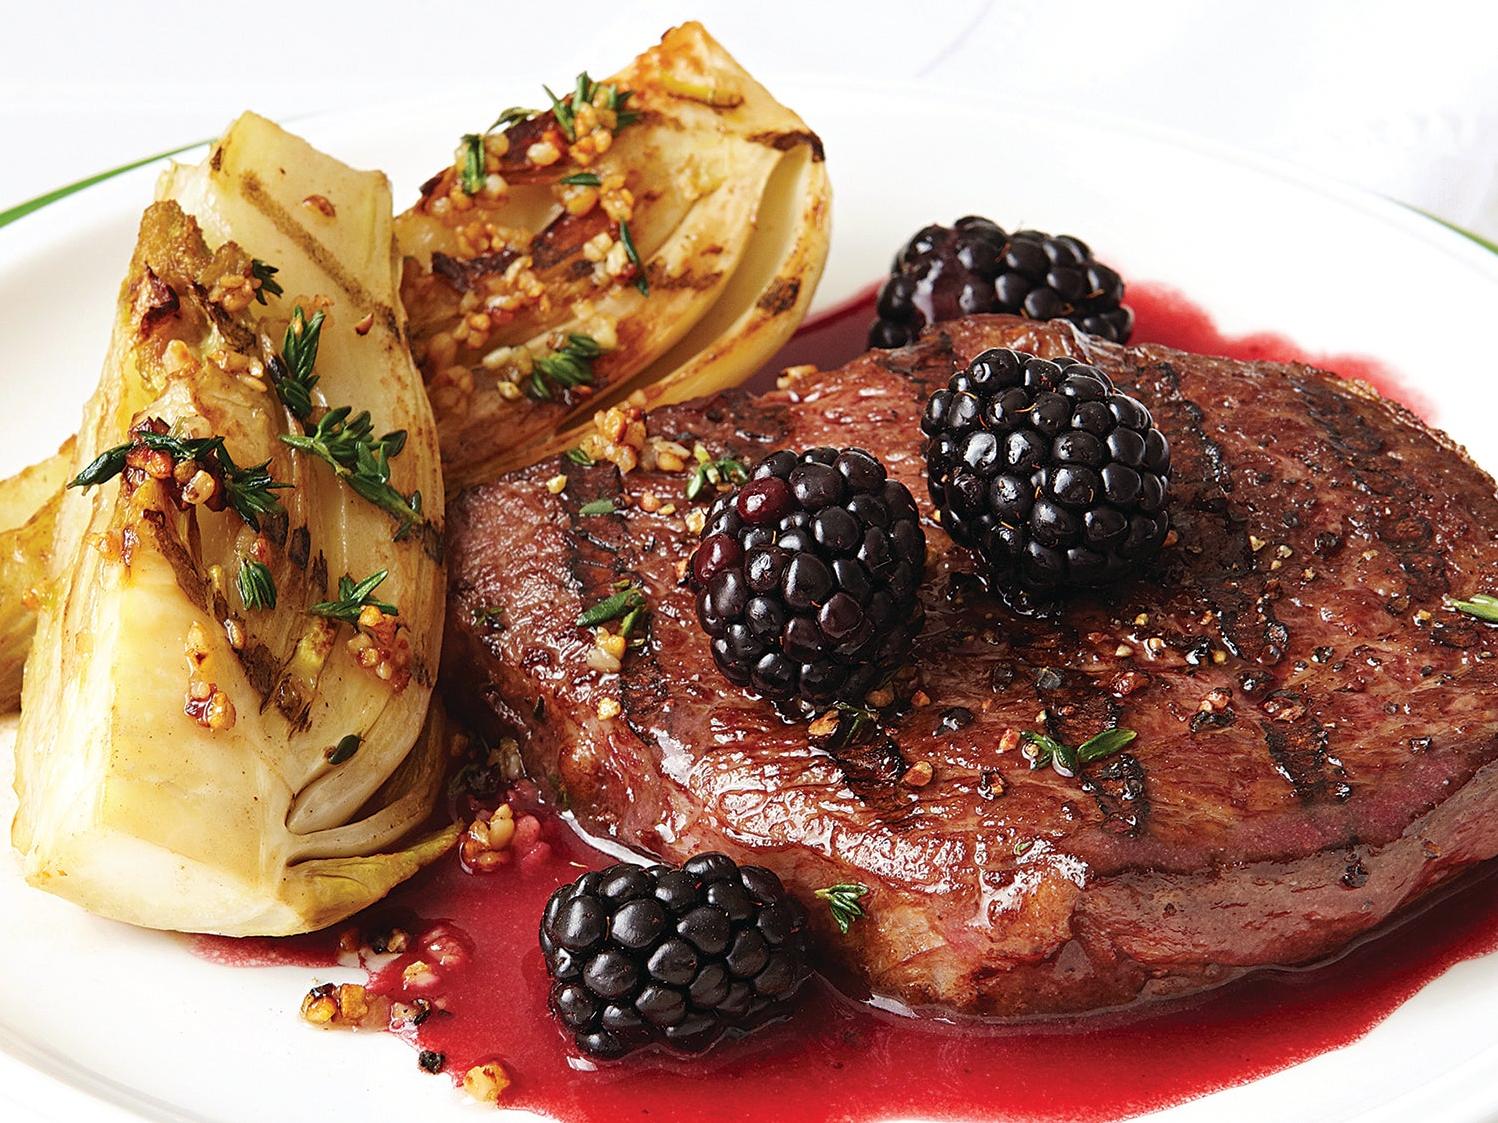  A match made in culinary heaven: juicy steak and fruity sauce